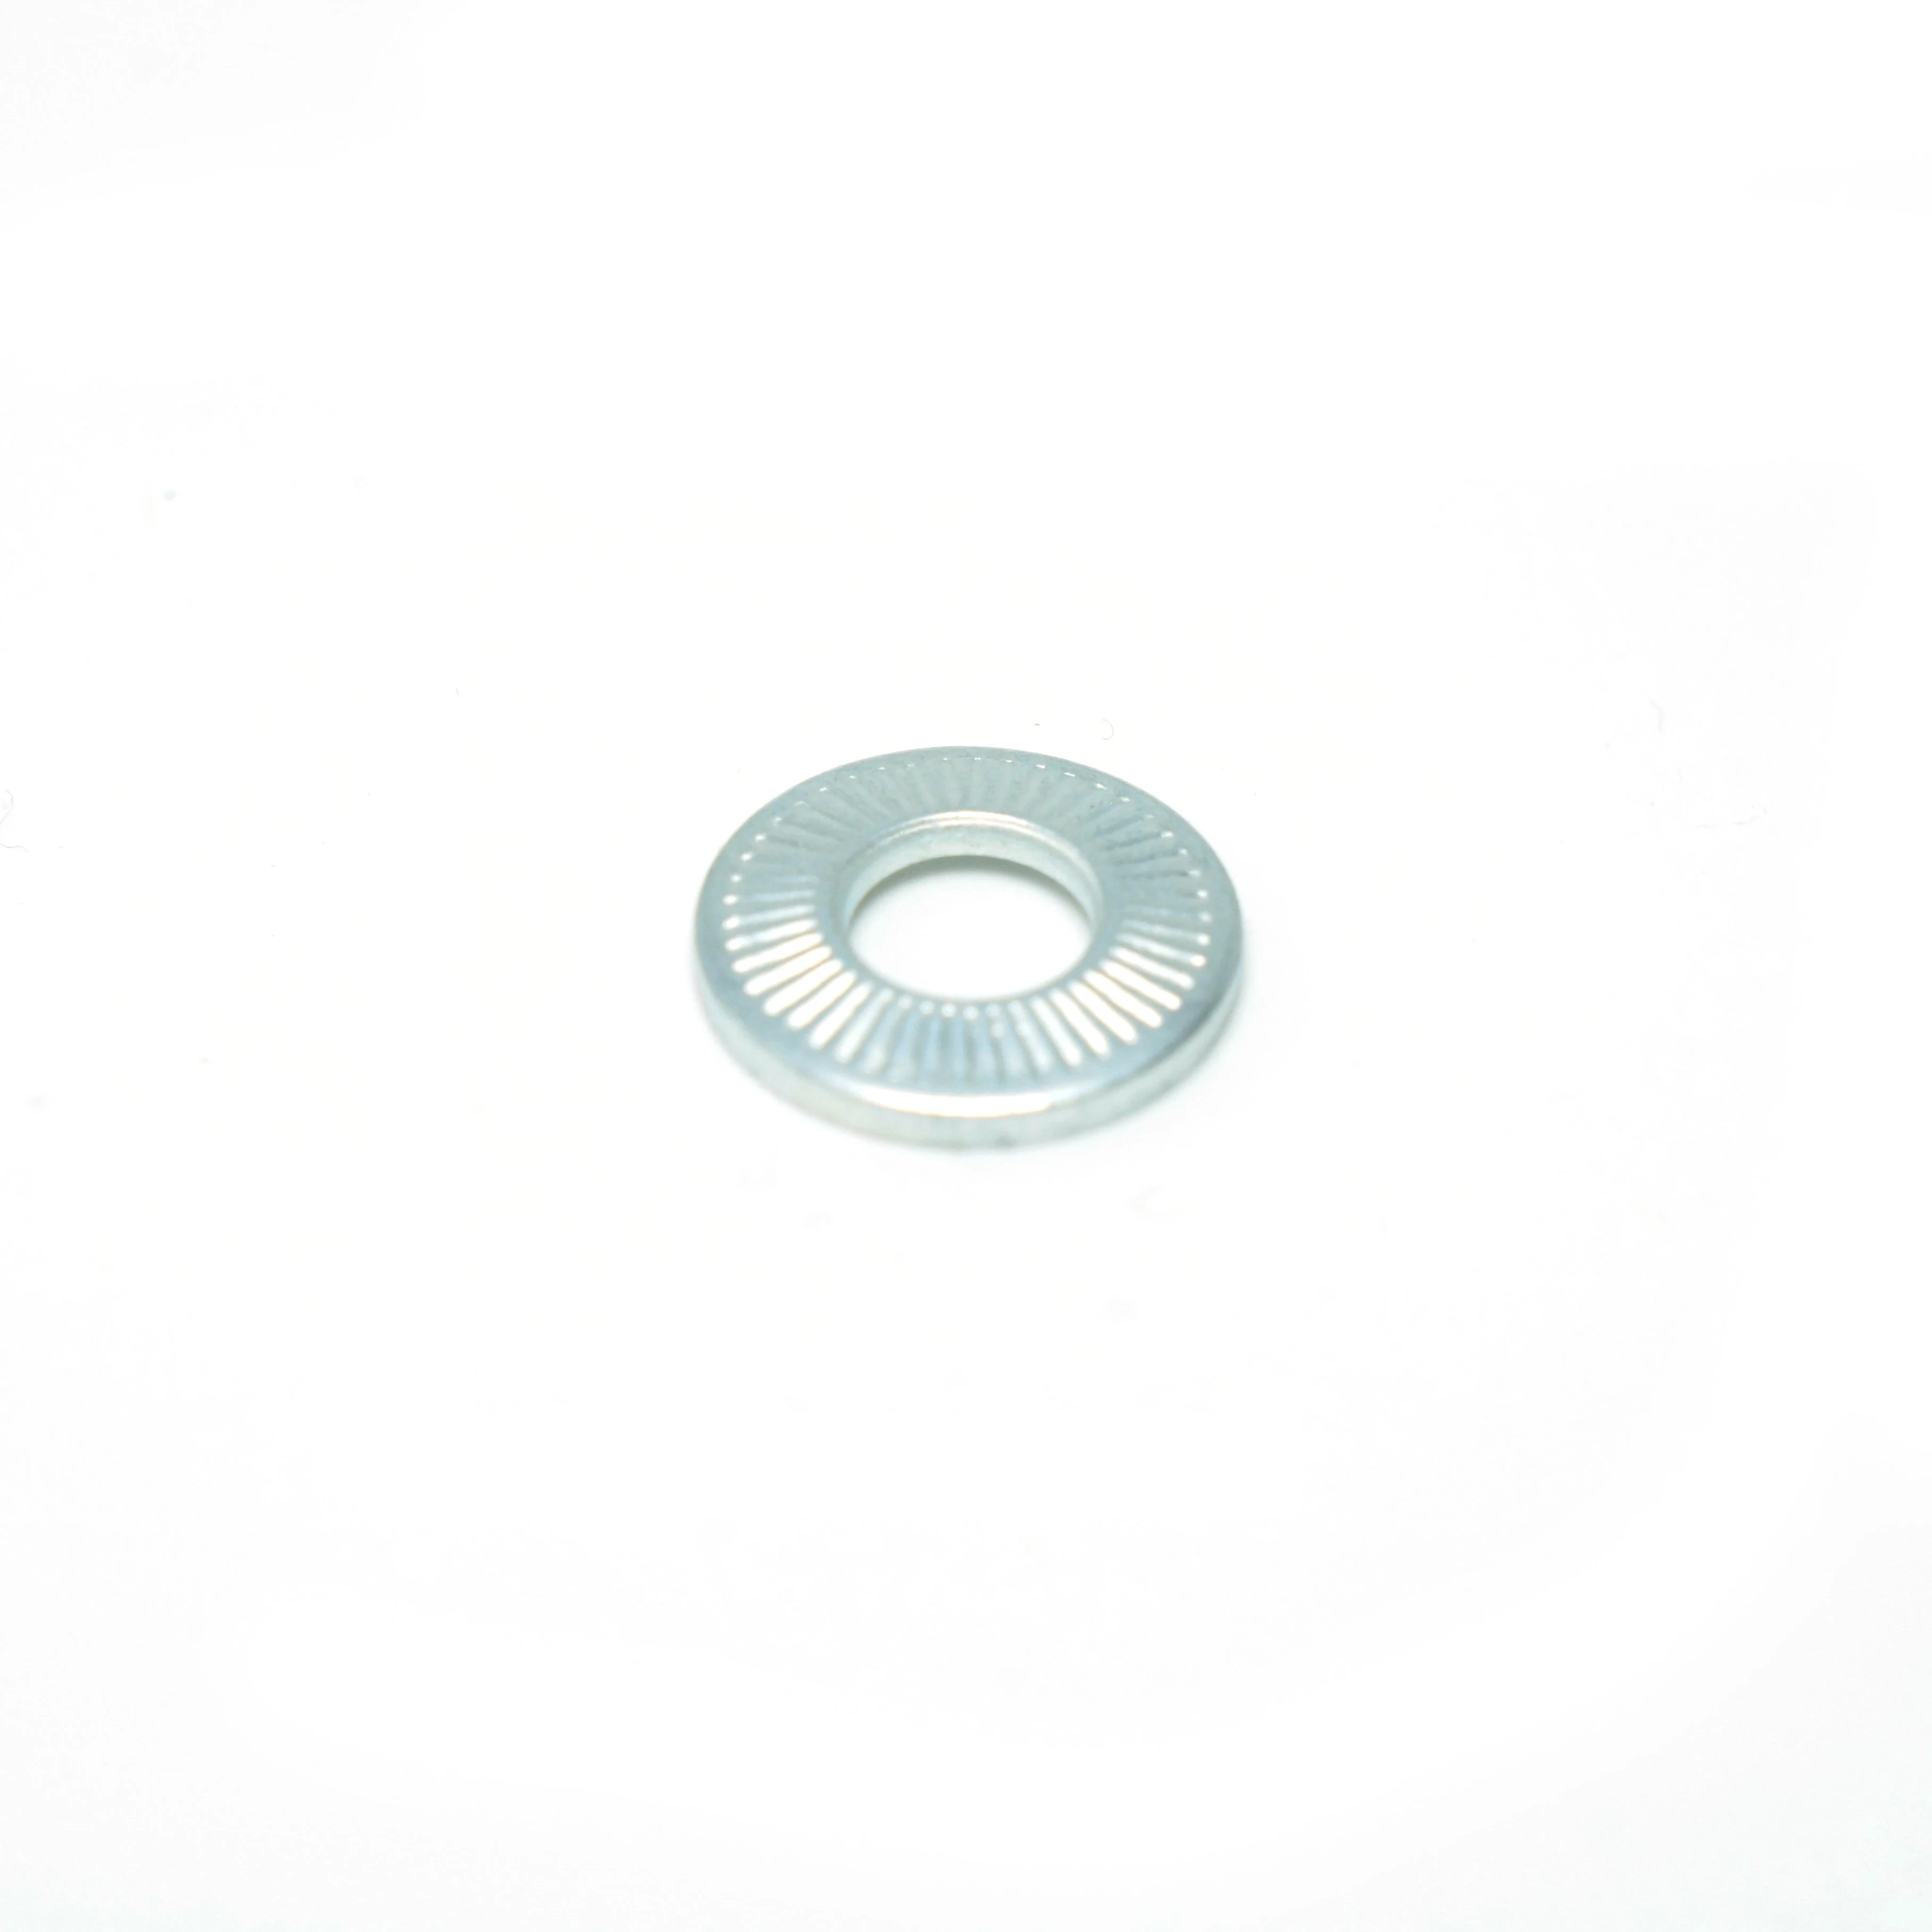 
stainless steel wedge lock washer DIN25201 